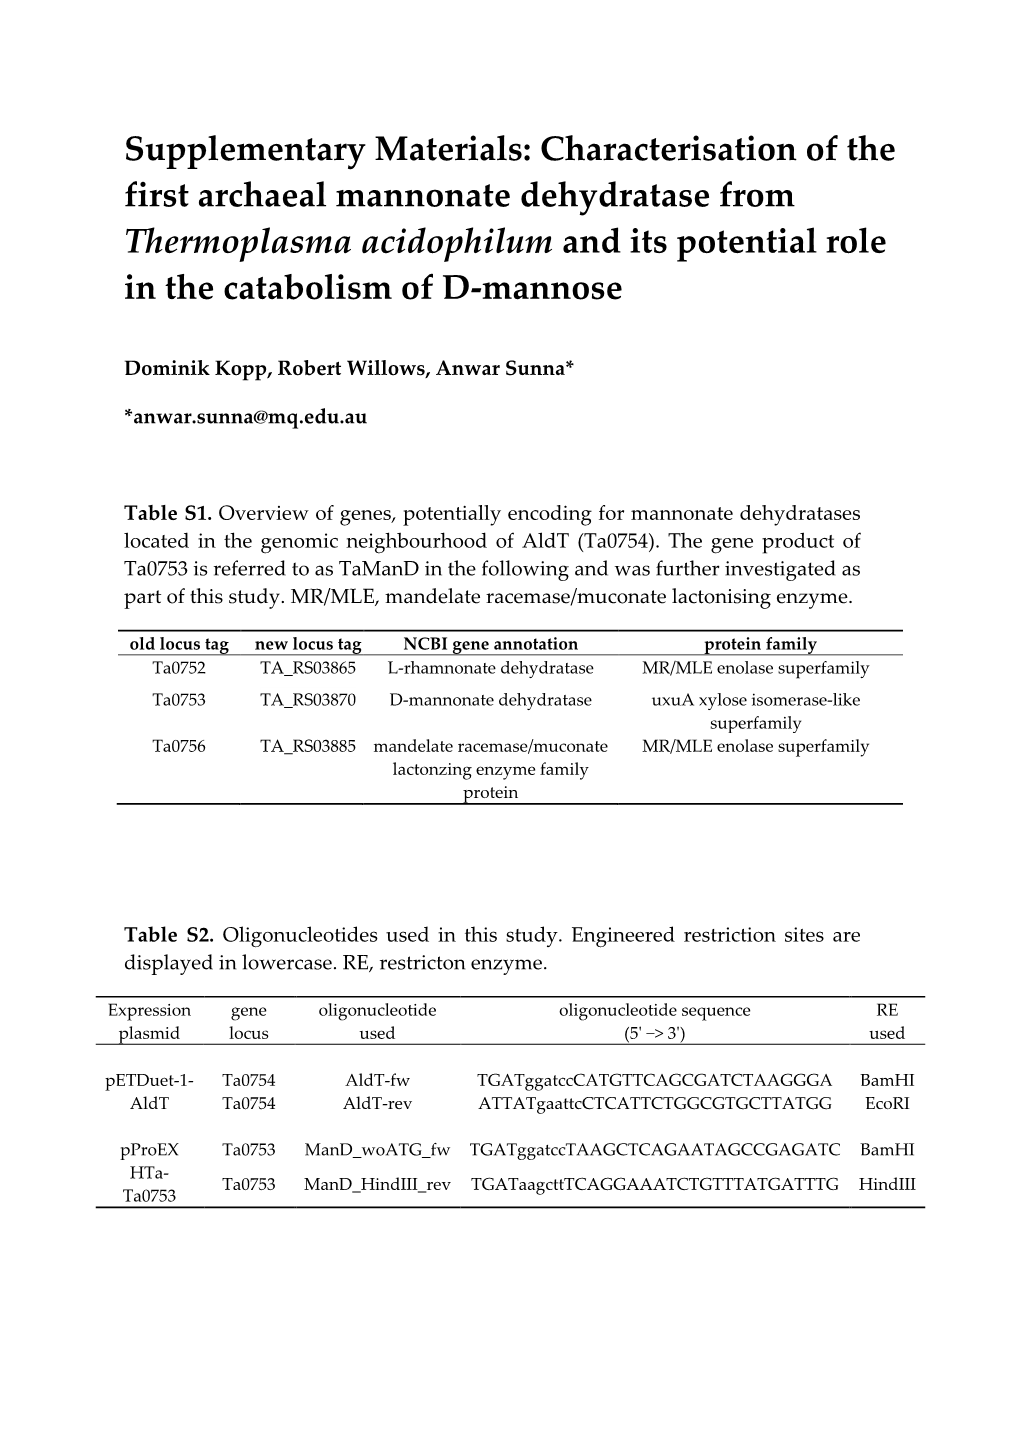 Characterisation of the First Archaeal Mannonate Dehydratase from Thermoplasma Acidophilum and Its Potential Role in the Catabolism of D-Mannose